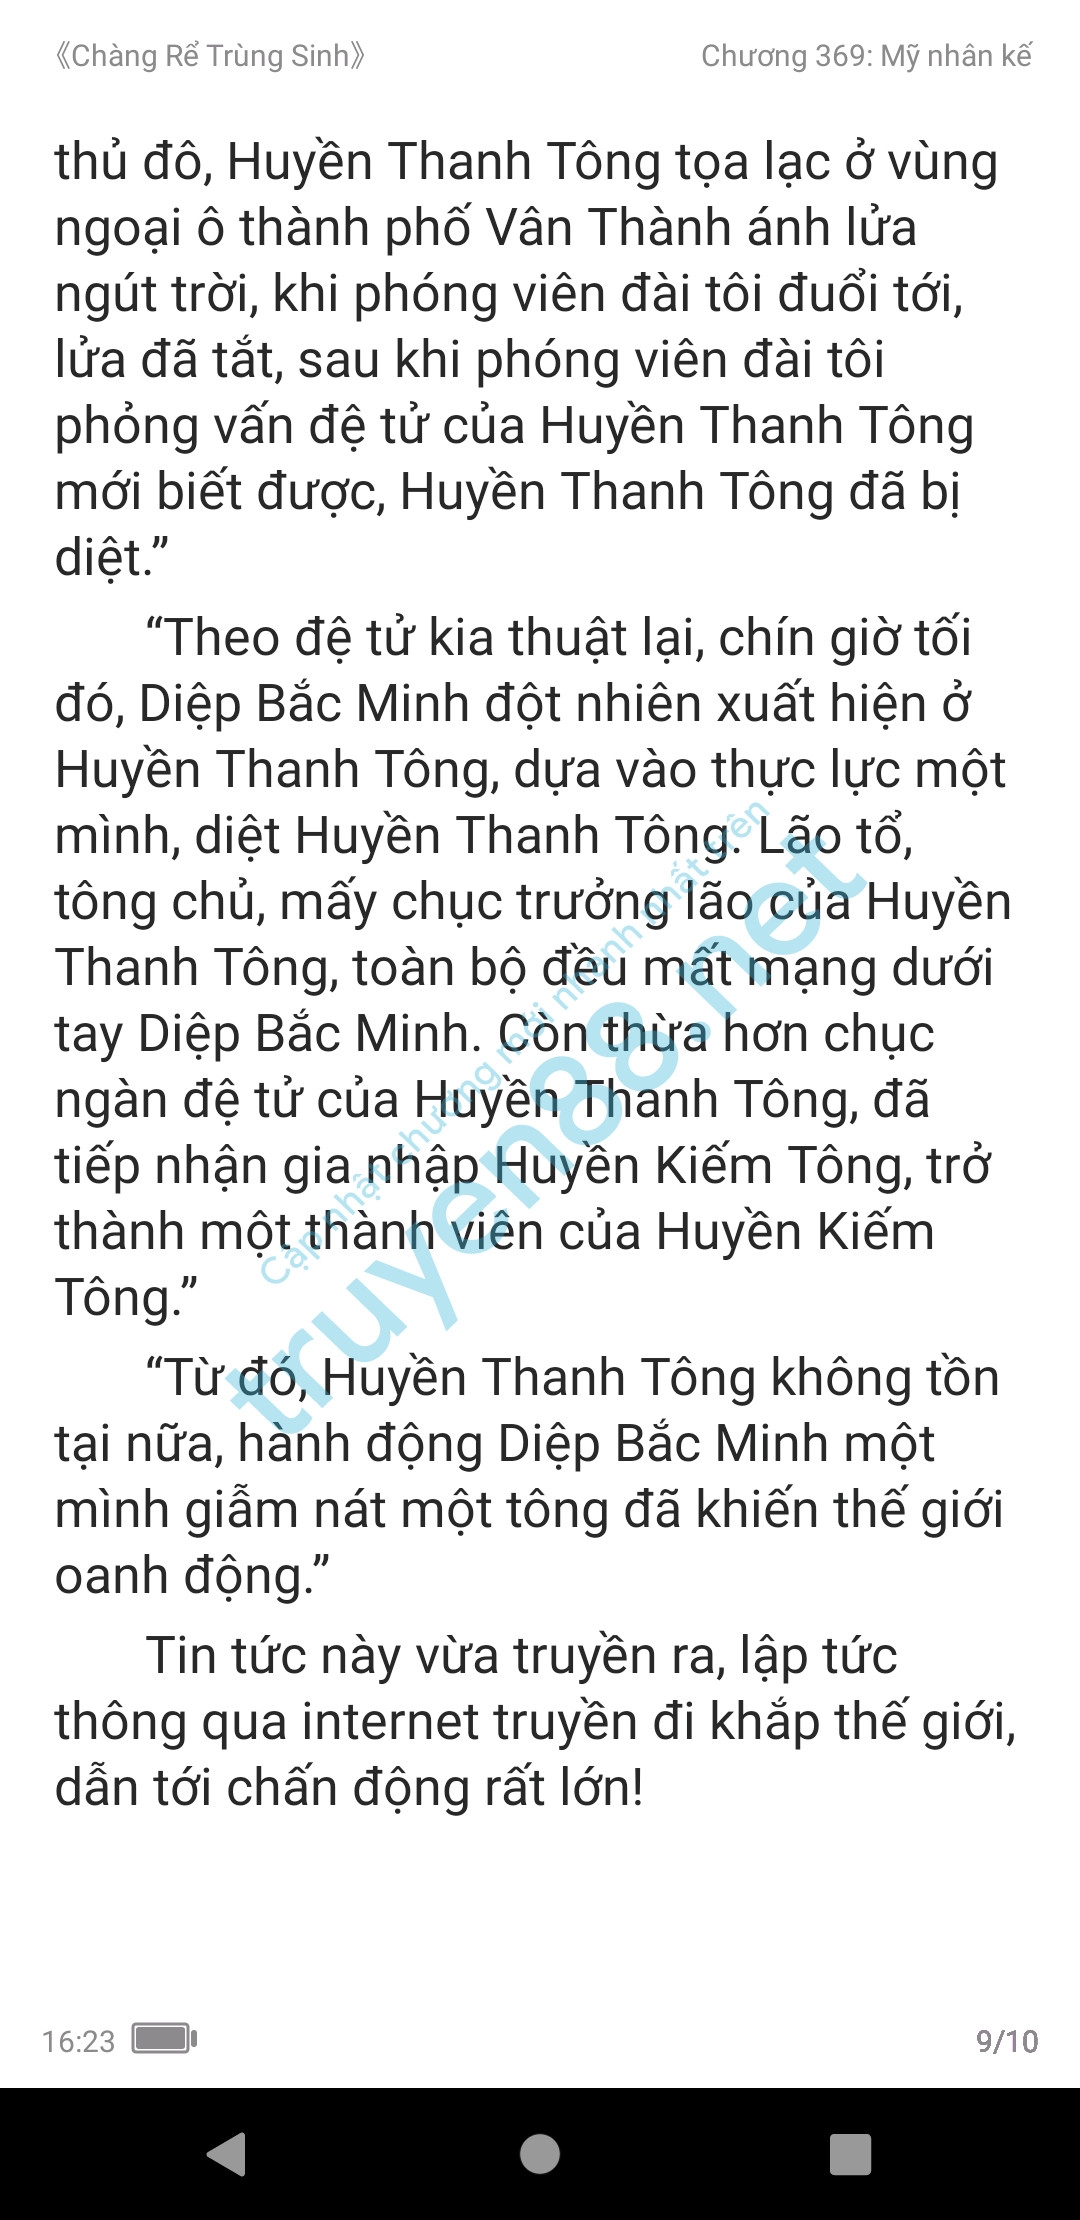 chang-re-trung-sinh-369-1